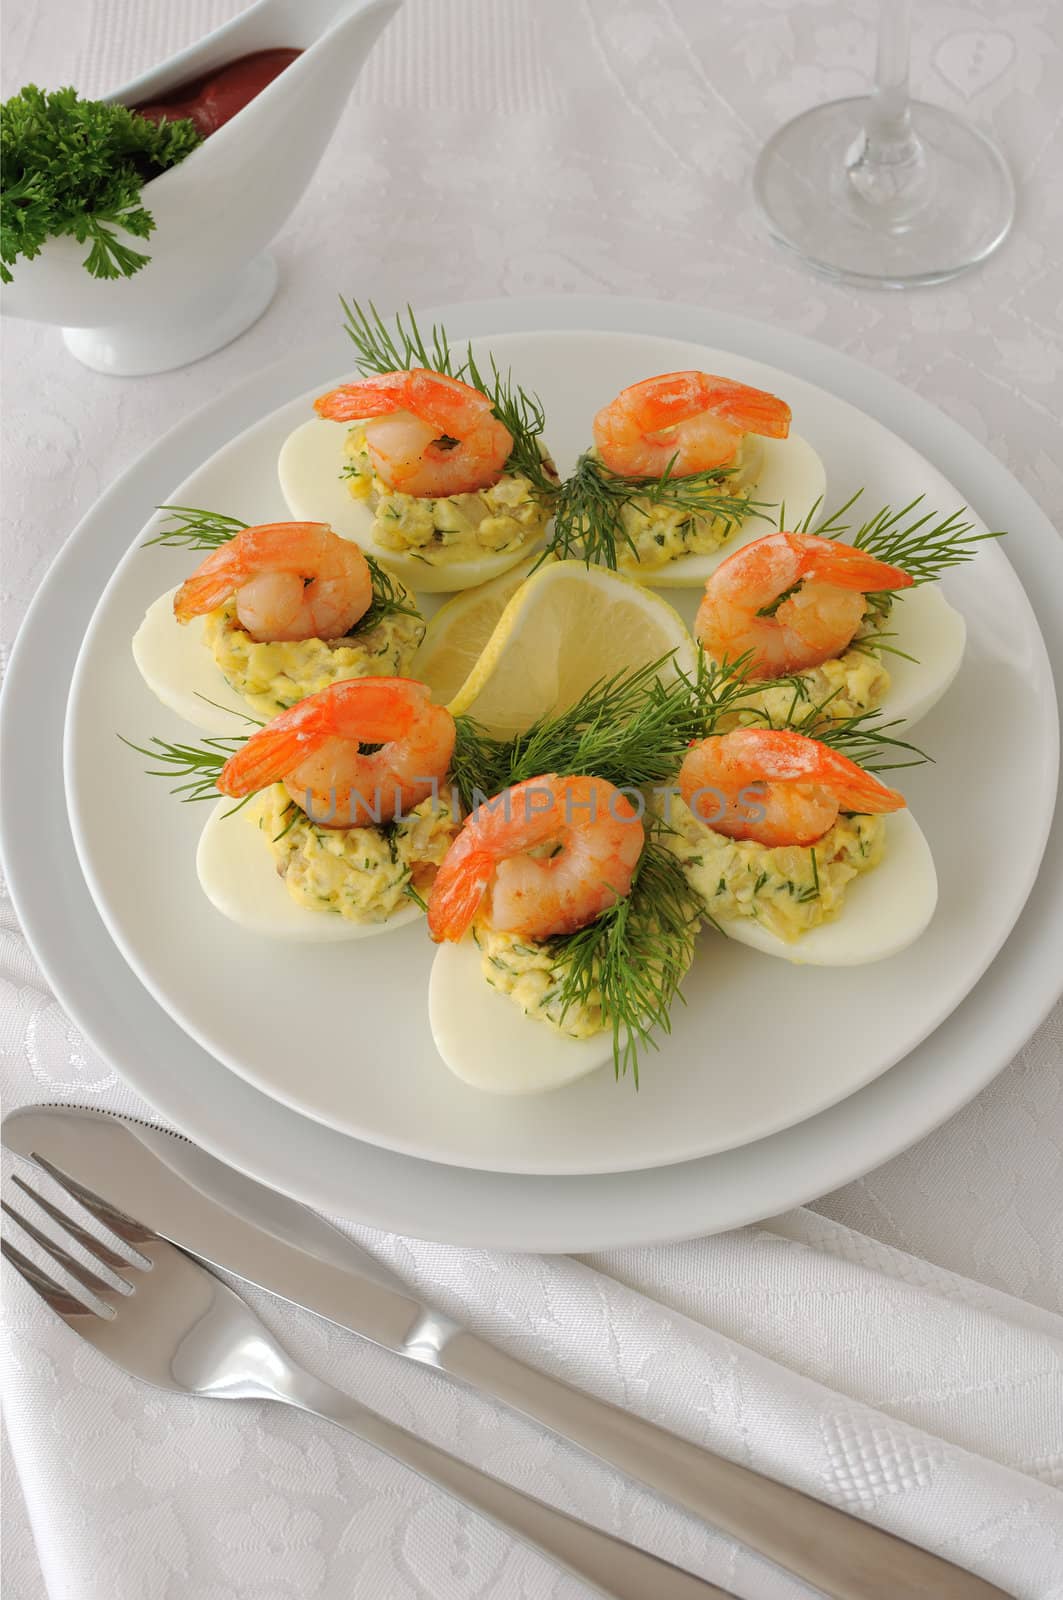 Eggs stuffed with spicy shrimp by Apolonia